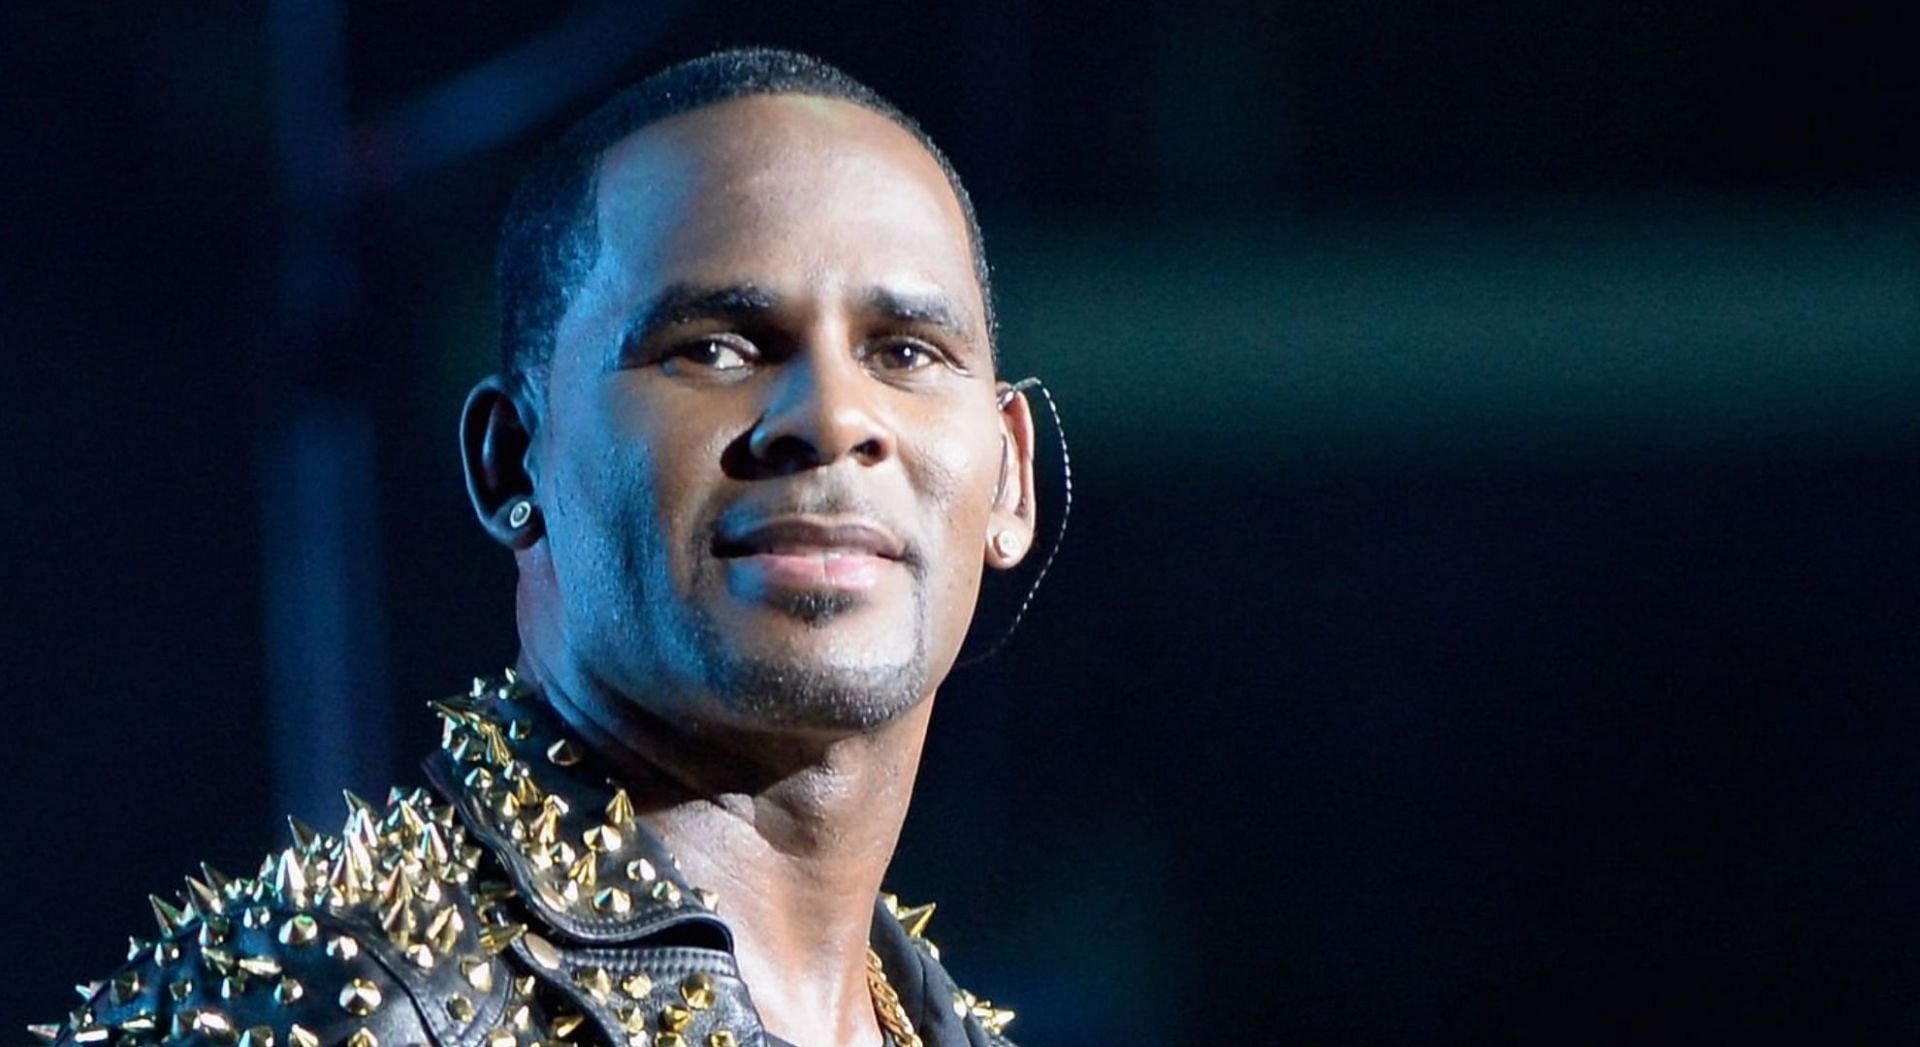 R Kelly&#039;s former goddaughter &quot;Jane&quot; testified against him during ongoing Chicago trial (Image via Getty Images)